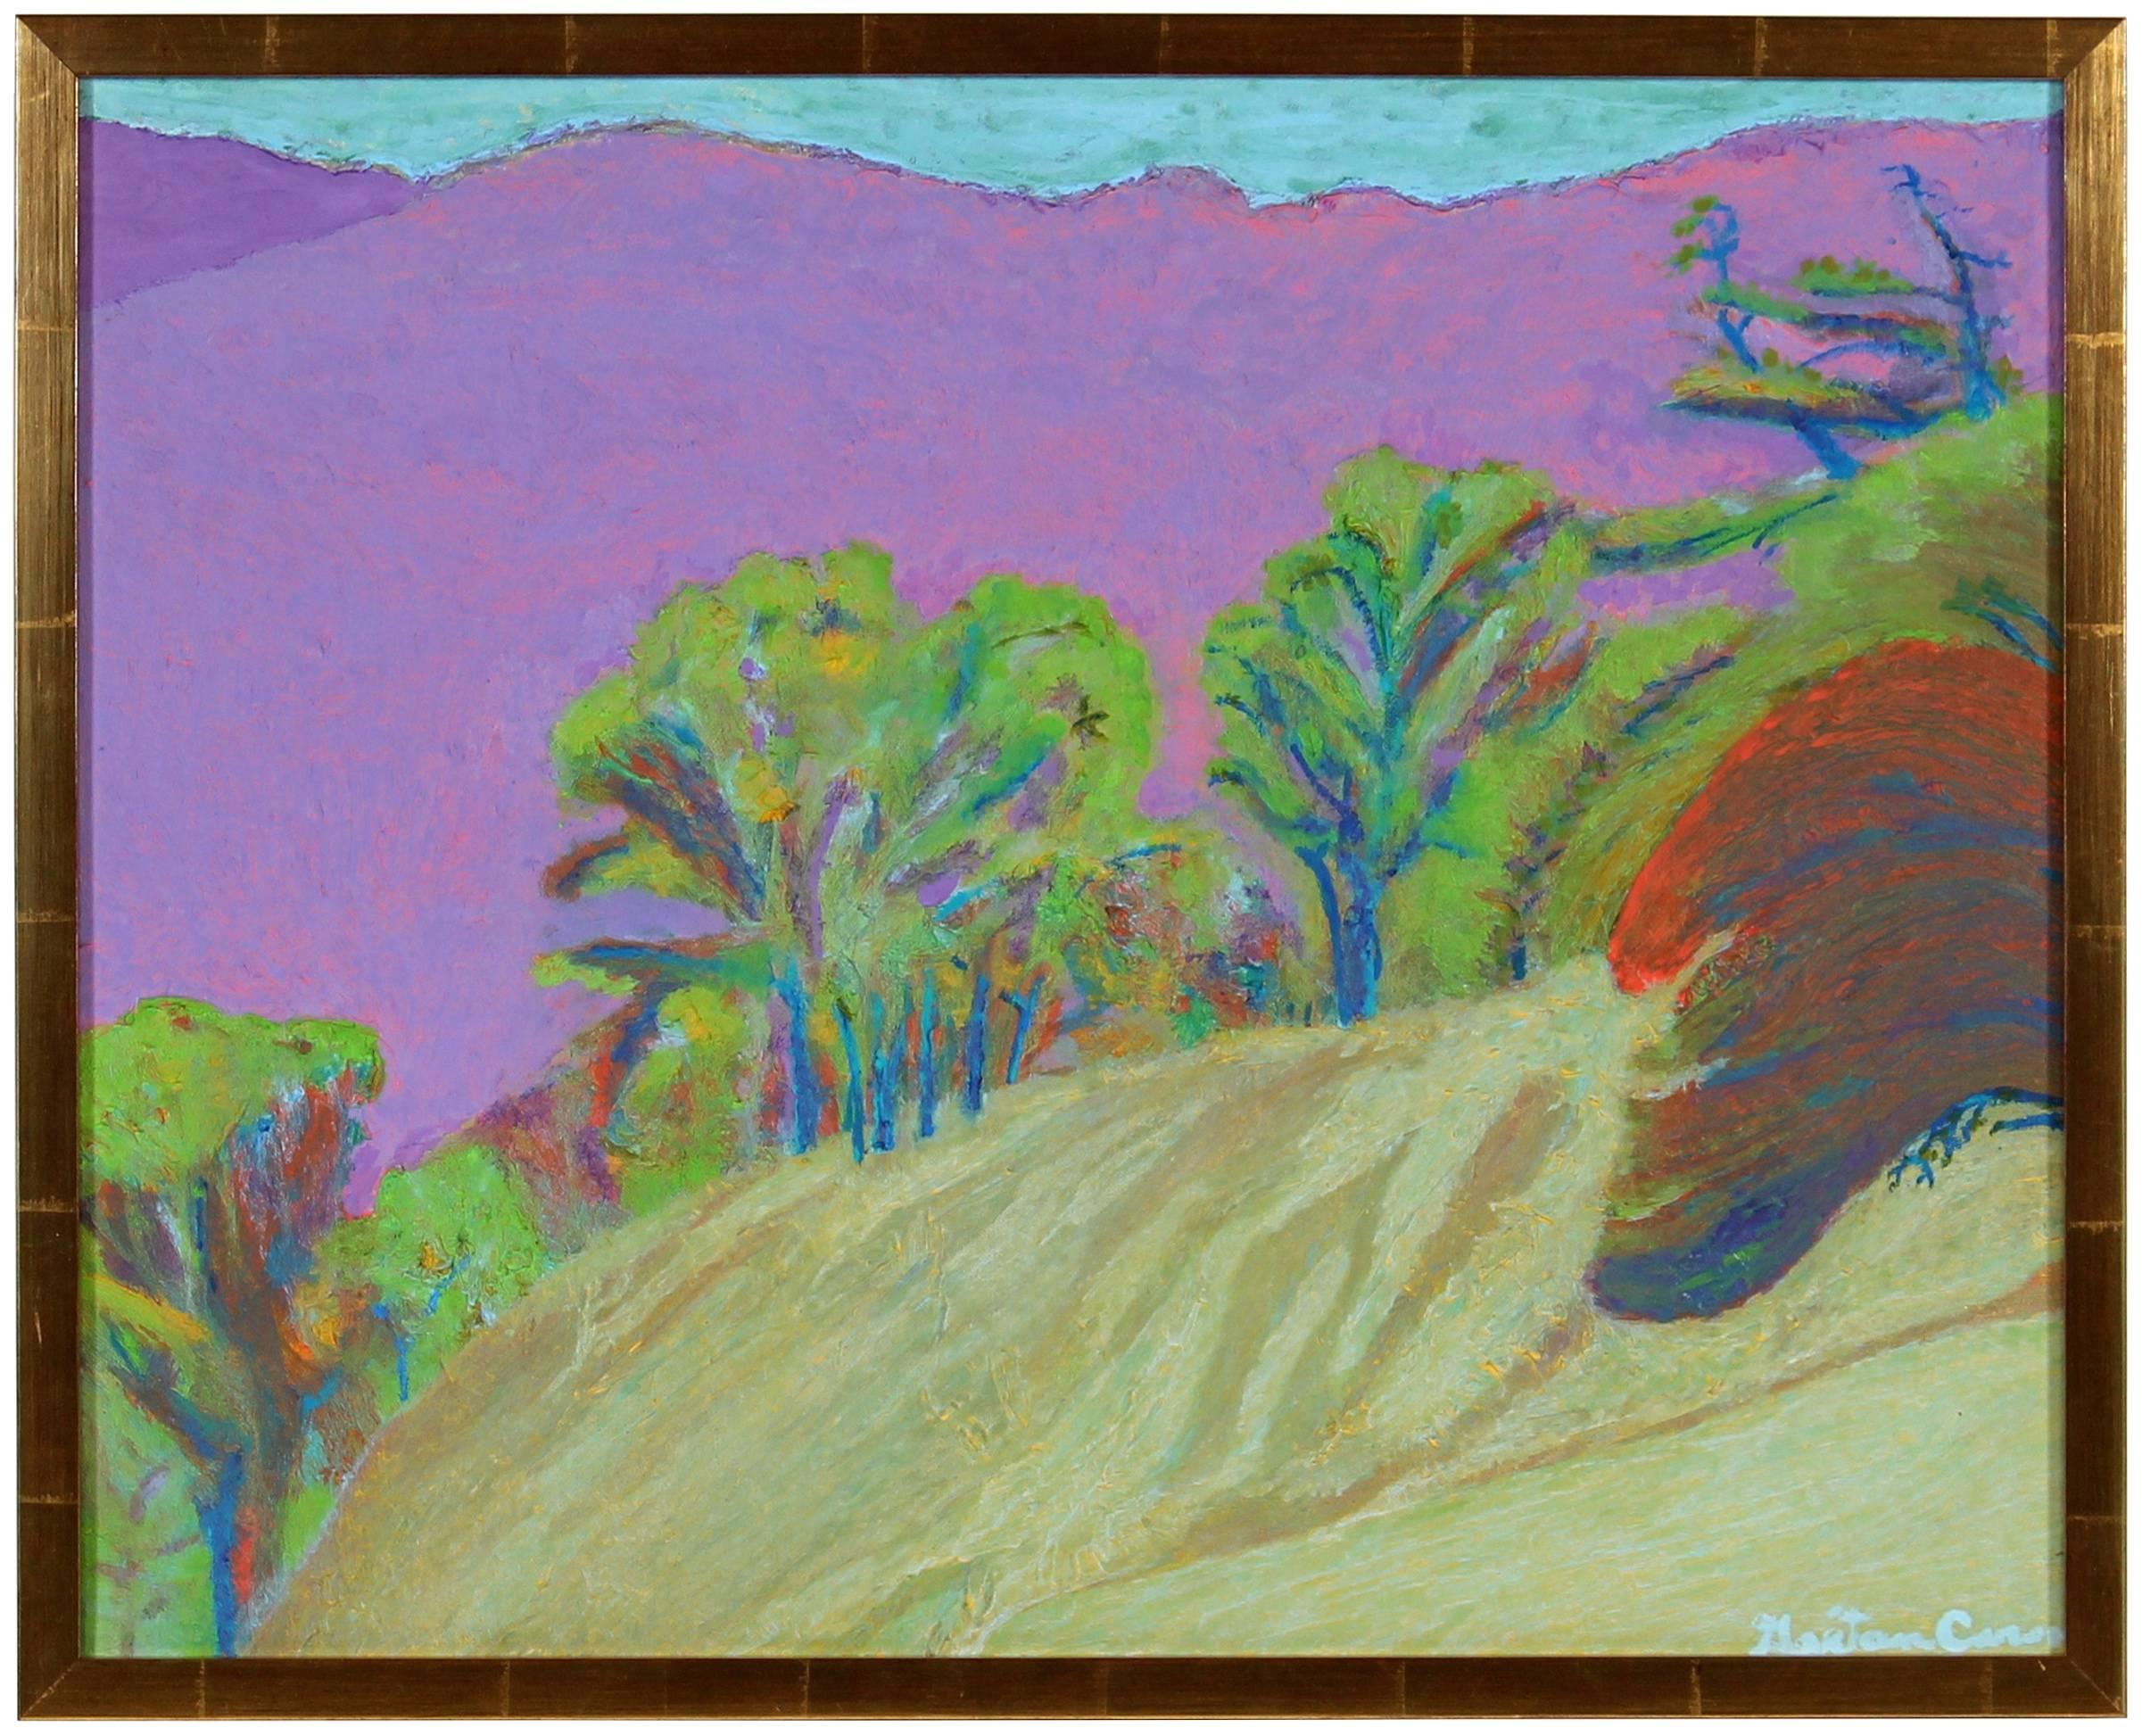 Gaétan Caron Abstract Painting - "Pine Ridge Fauve" Northern California Oil Landscape in Chartreuse, Blue & Pink